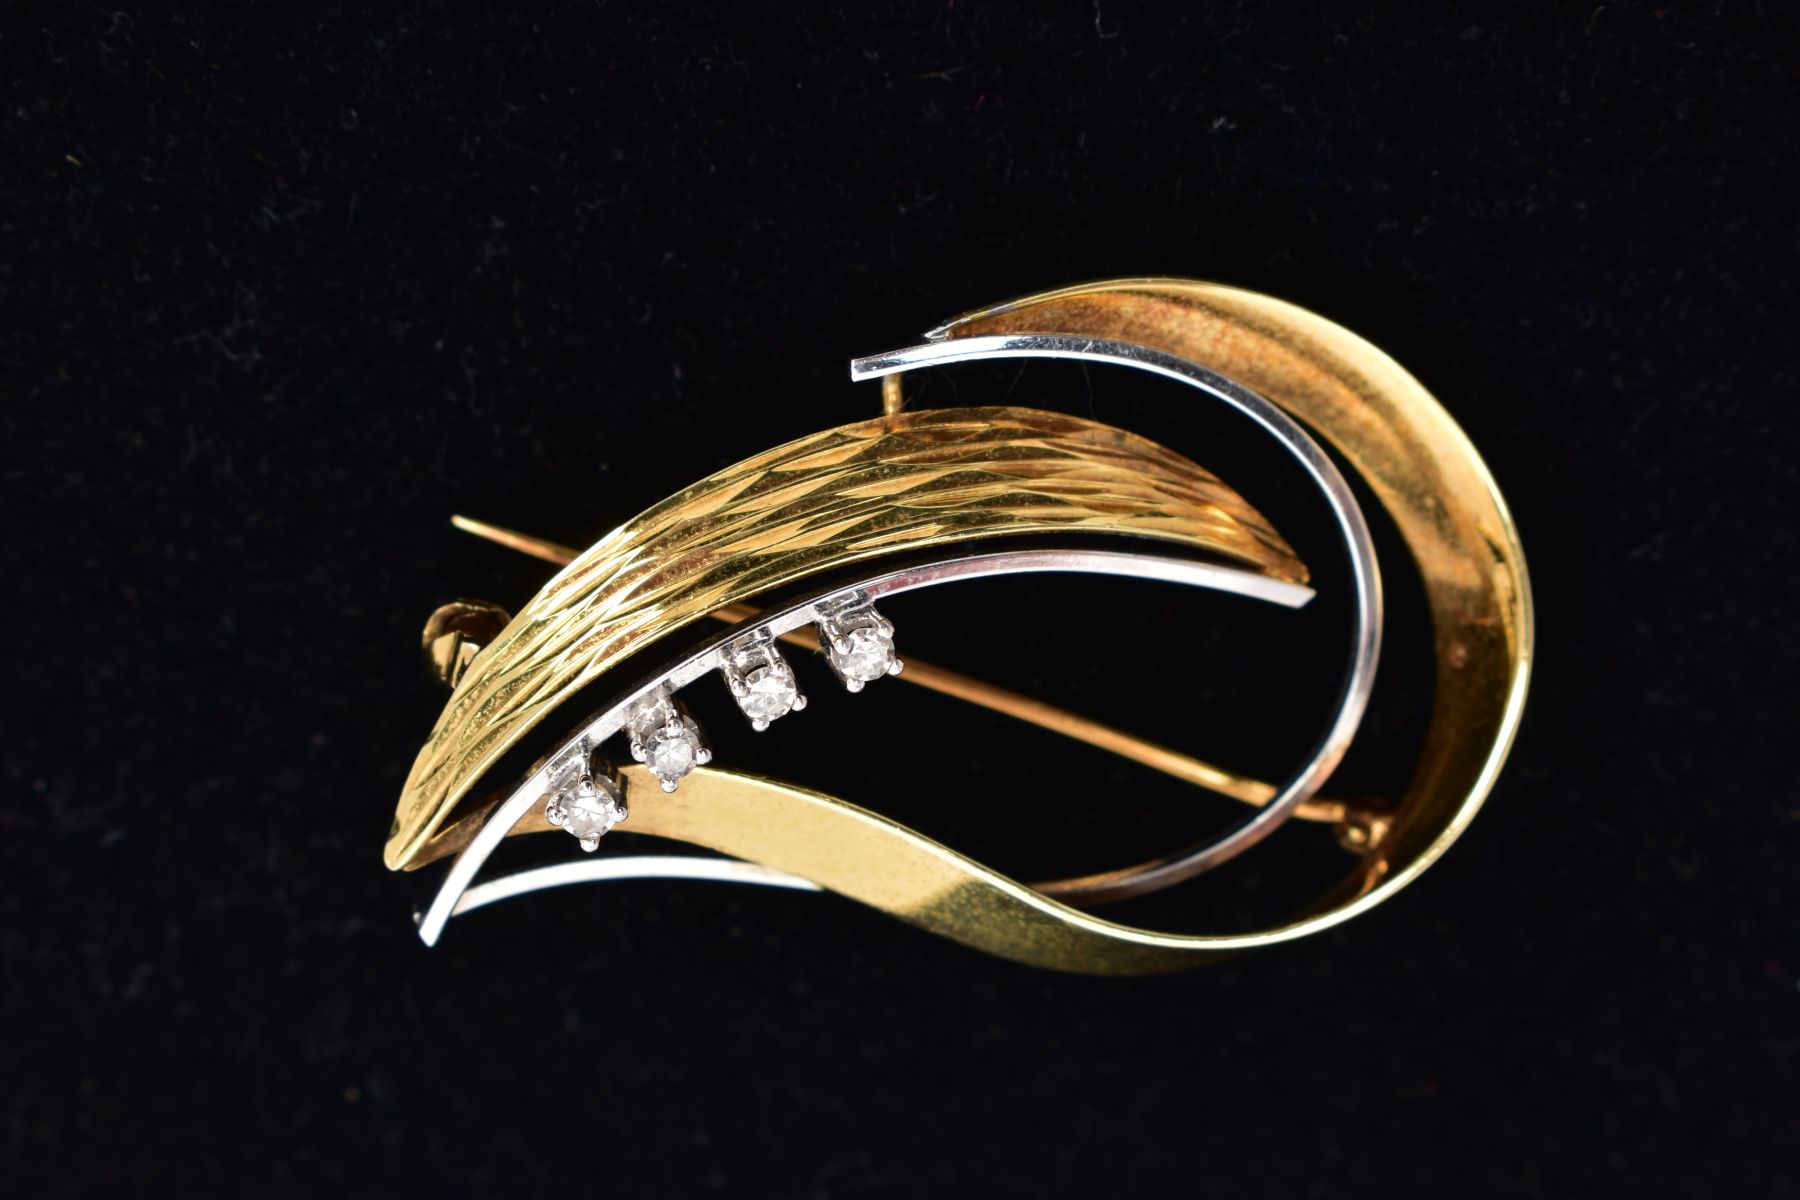 A BI-COLOUR 14CT GOLD DIAMOND BROOCH, open work design set with four single cut diamonds, fitted - Image 5 of 5